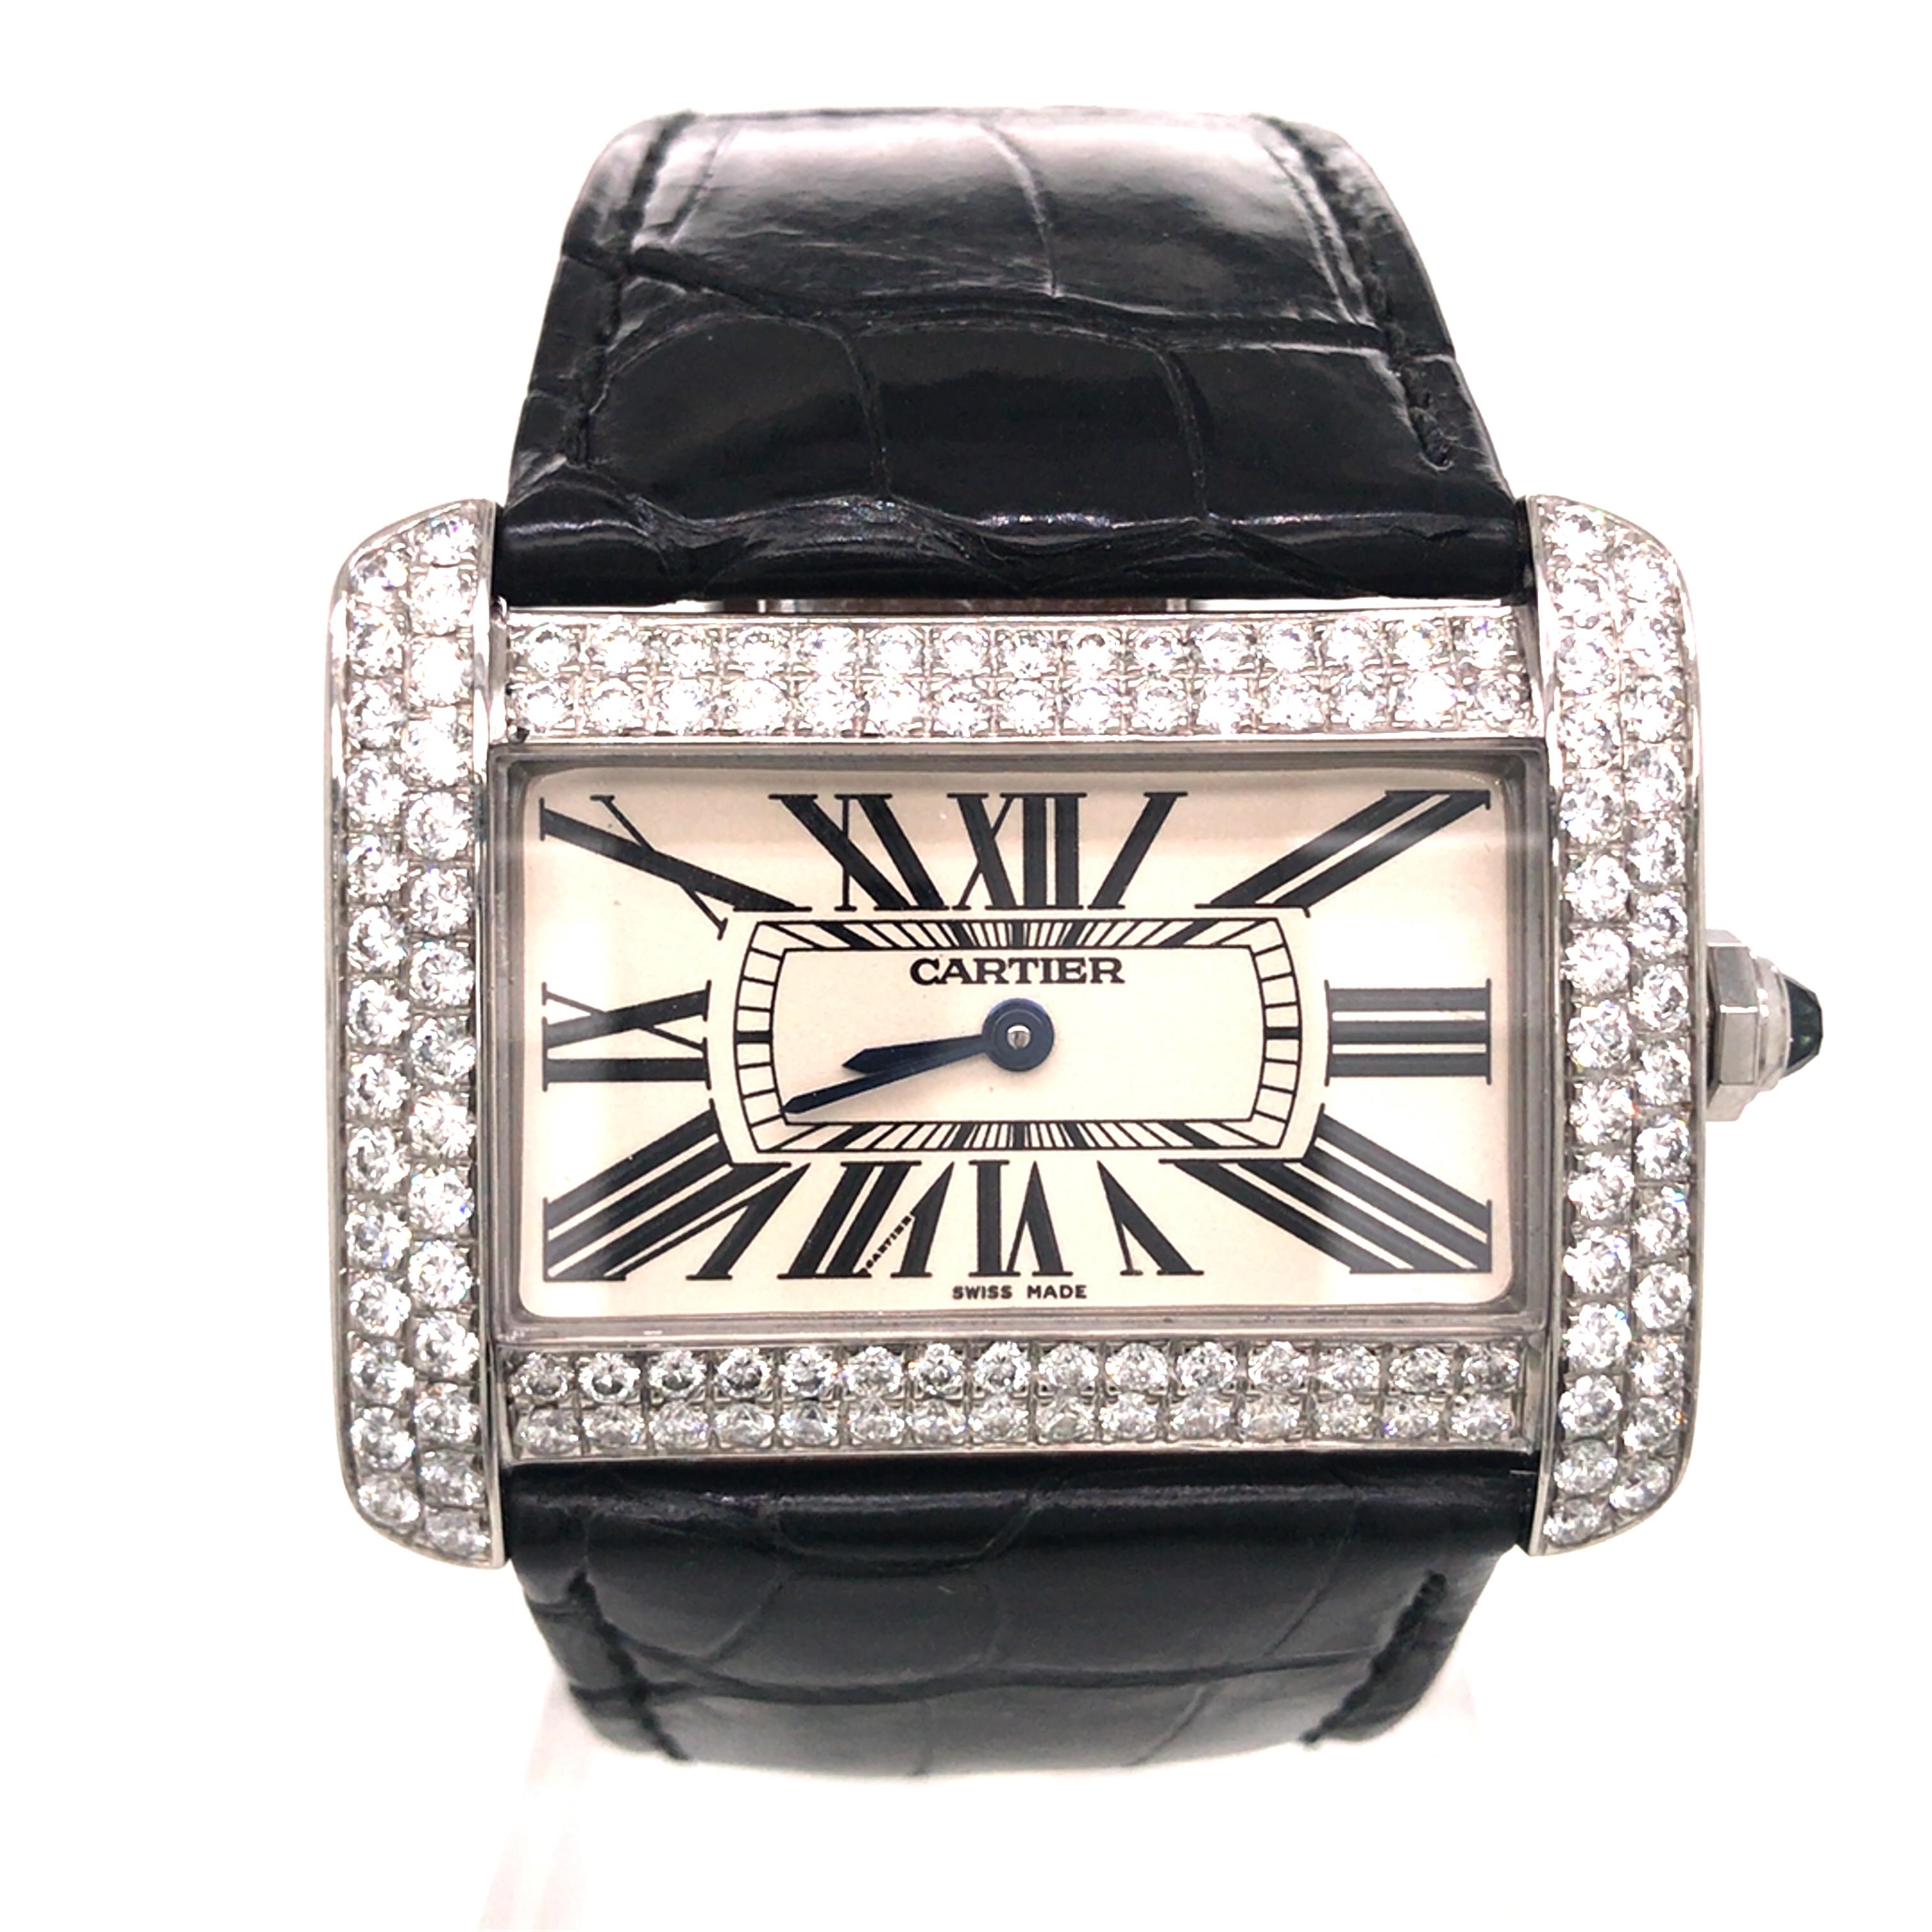 Cartier Tank Divan XL Watch After-Market Diamond Bezel. Round Brilliant Cut Diamonds weighing 2.82 carat total weight, G-H in color and VS-SI in clarity are expertly set.